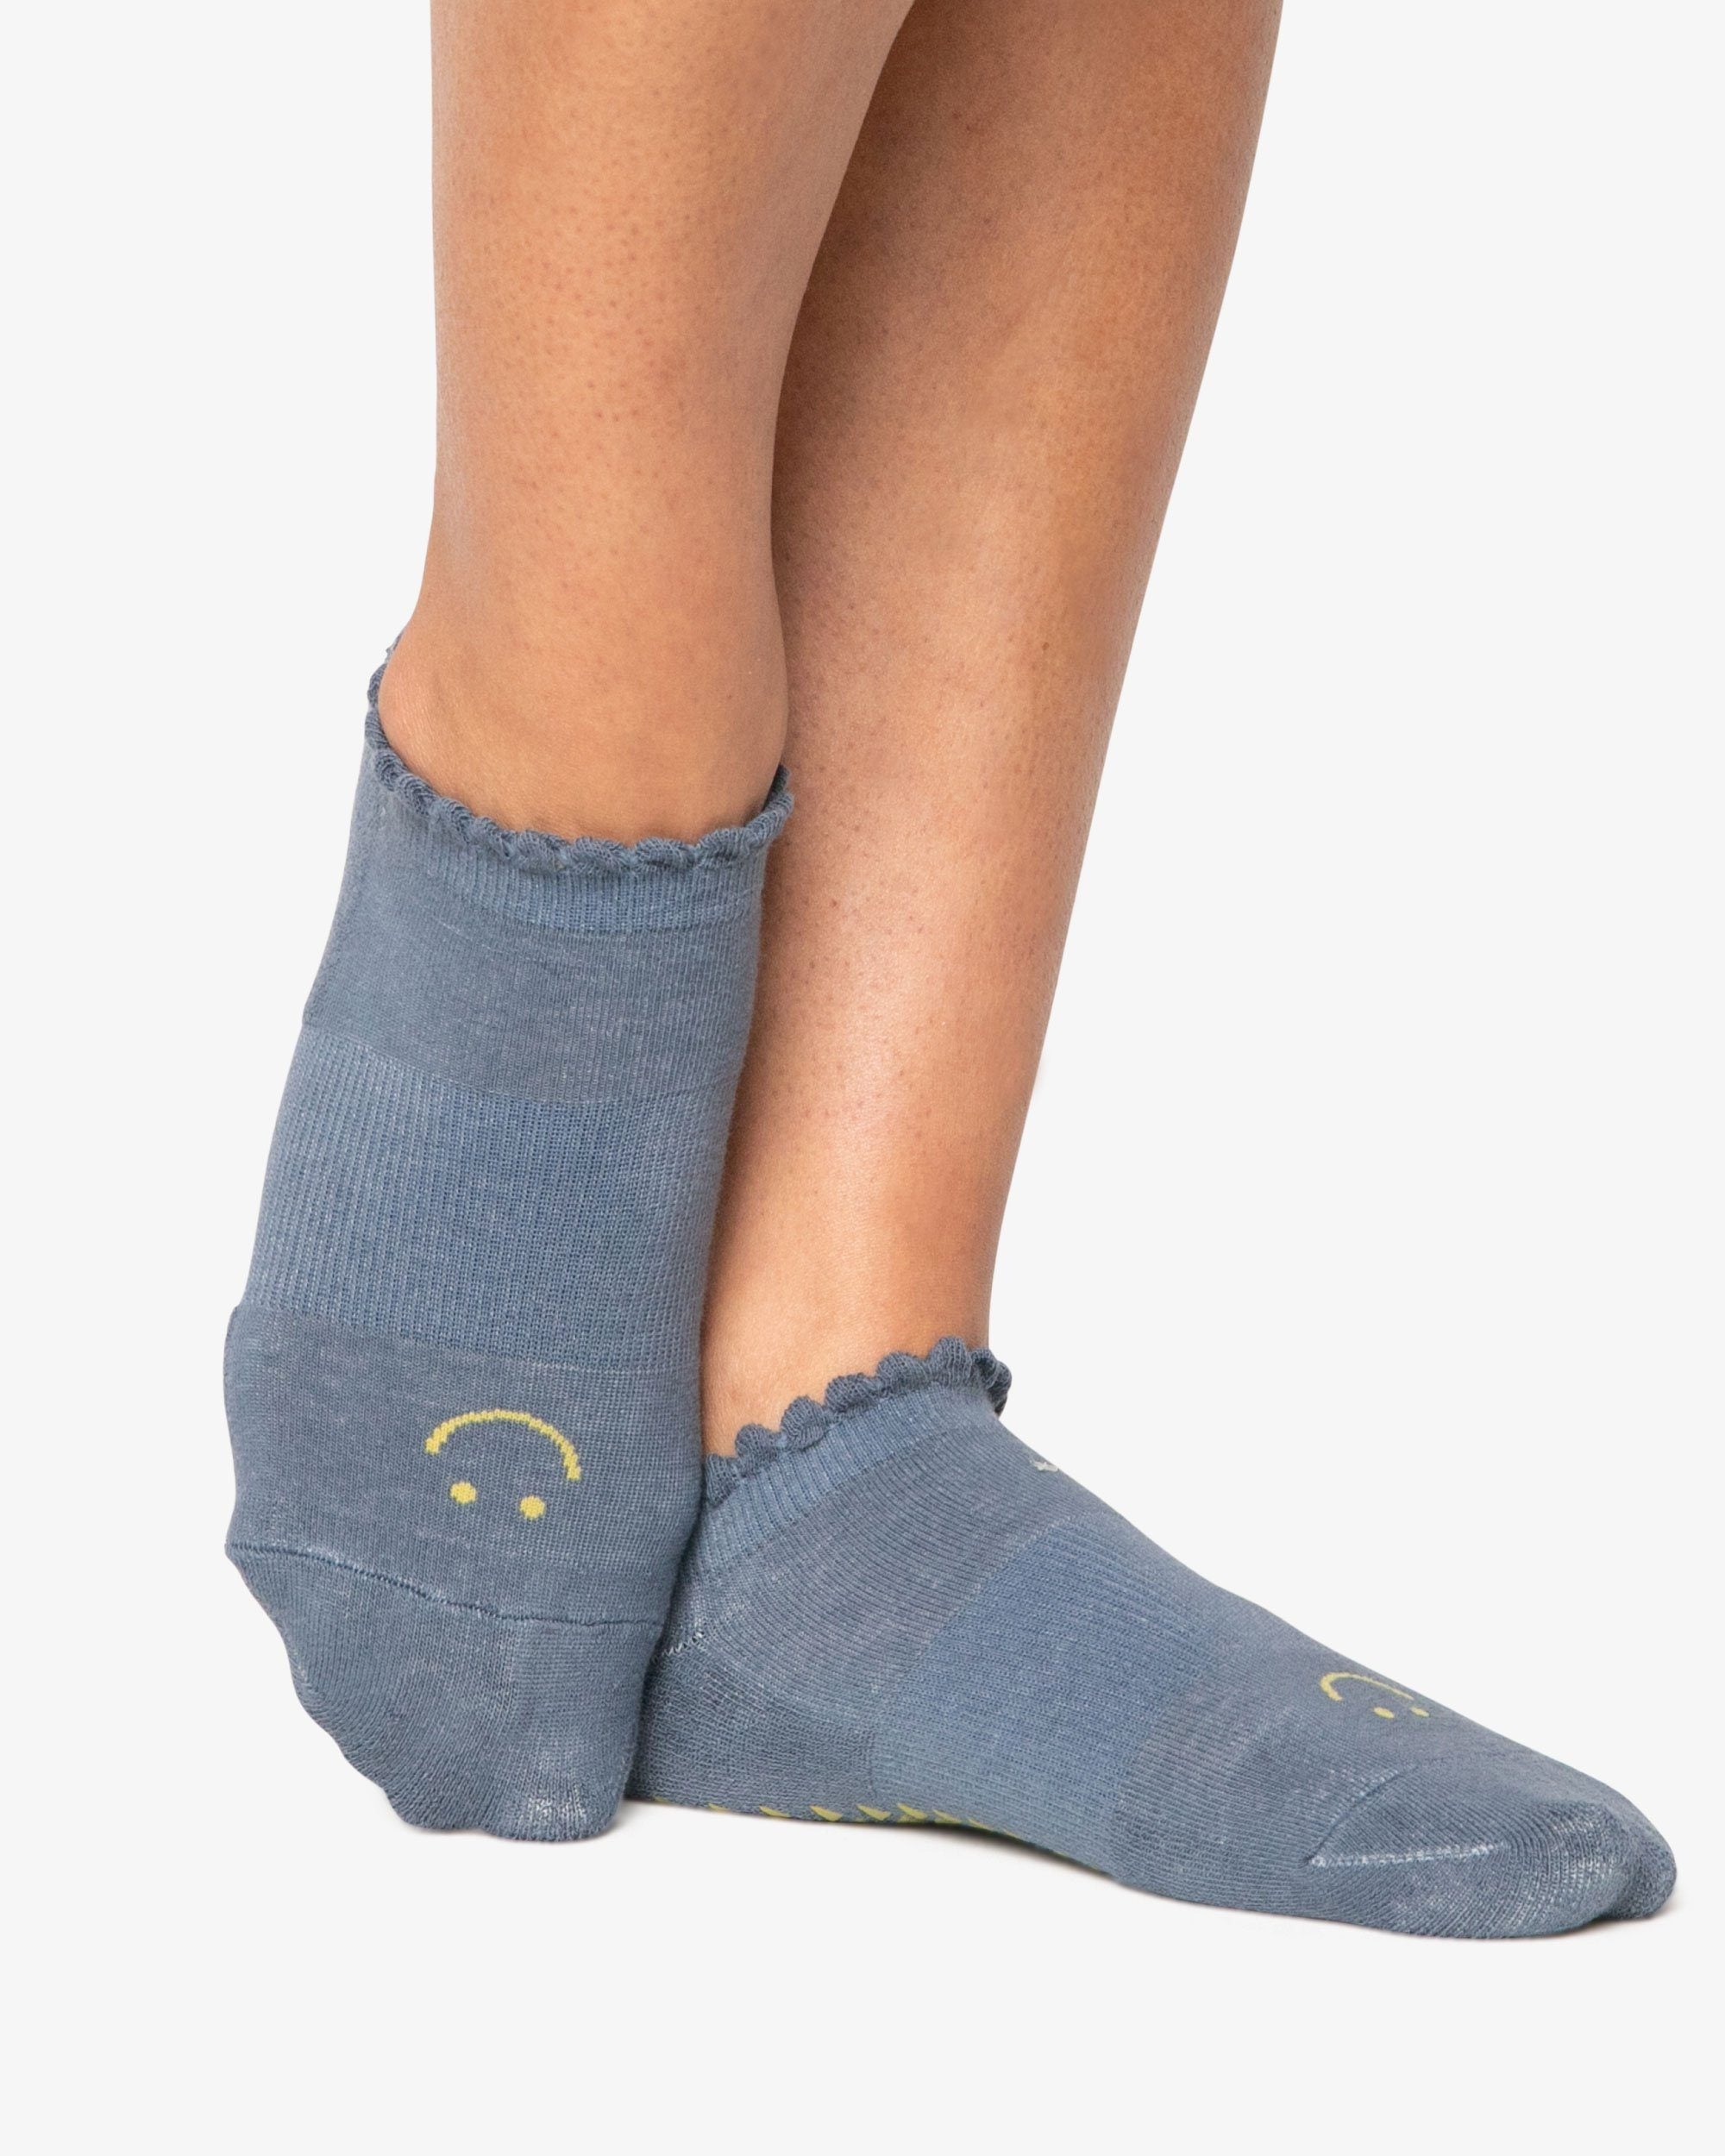 Pointe Studio Expression Socks  Anthropologie Japan - Women's Clothing,  Accessories & Home